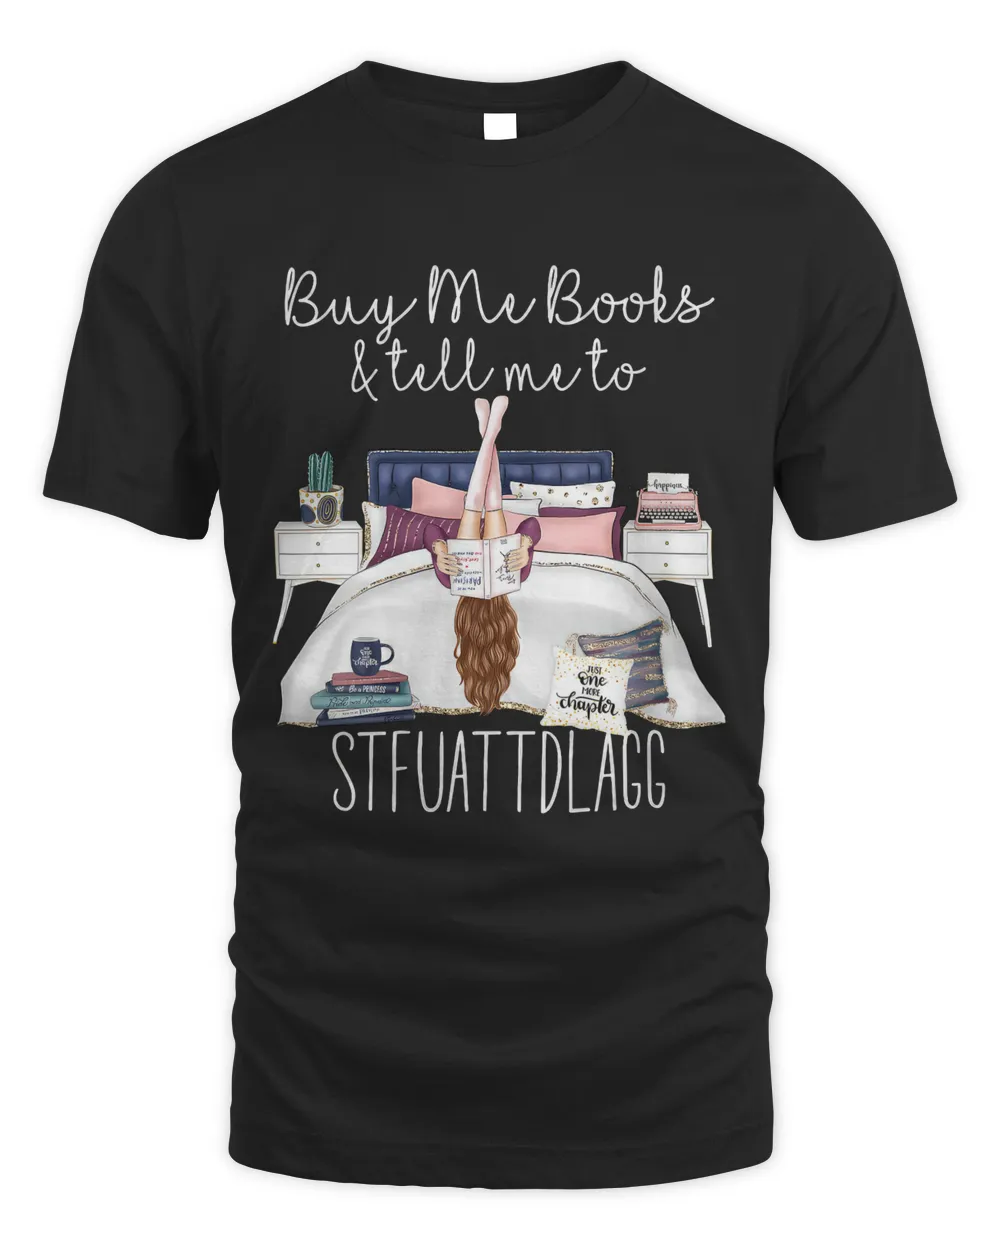 book-sdx-26 Buy Me Books Tell Me To Stfuattdlagg